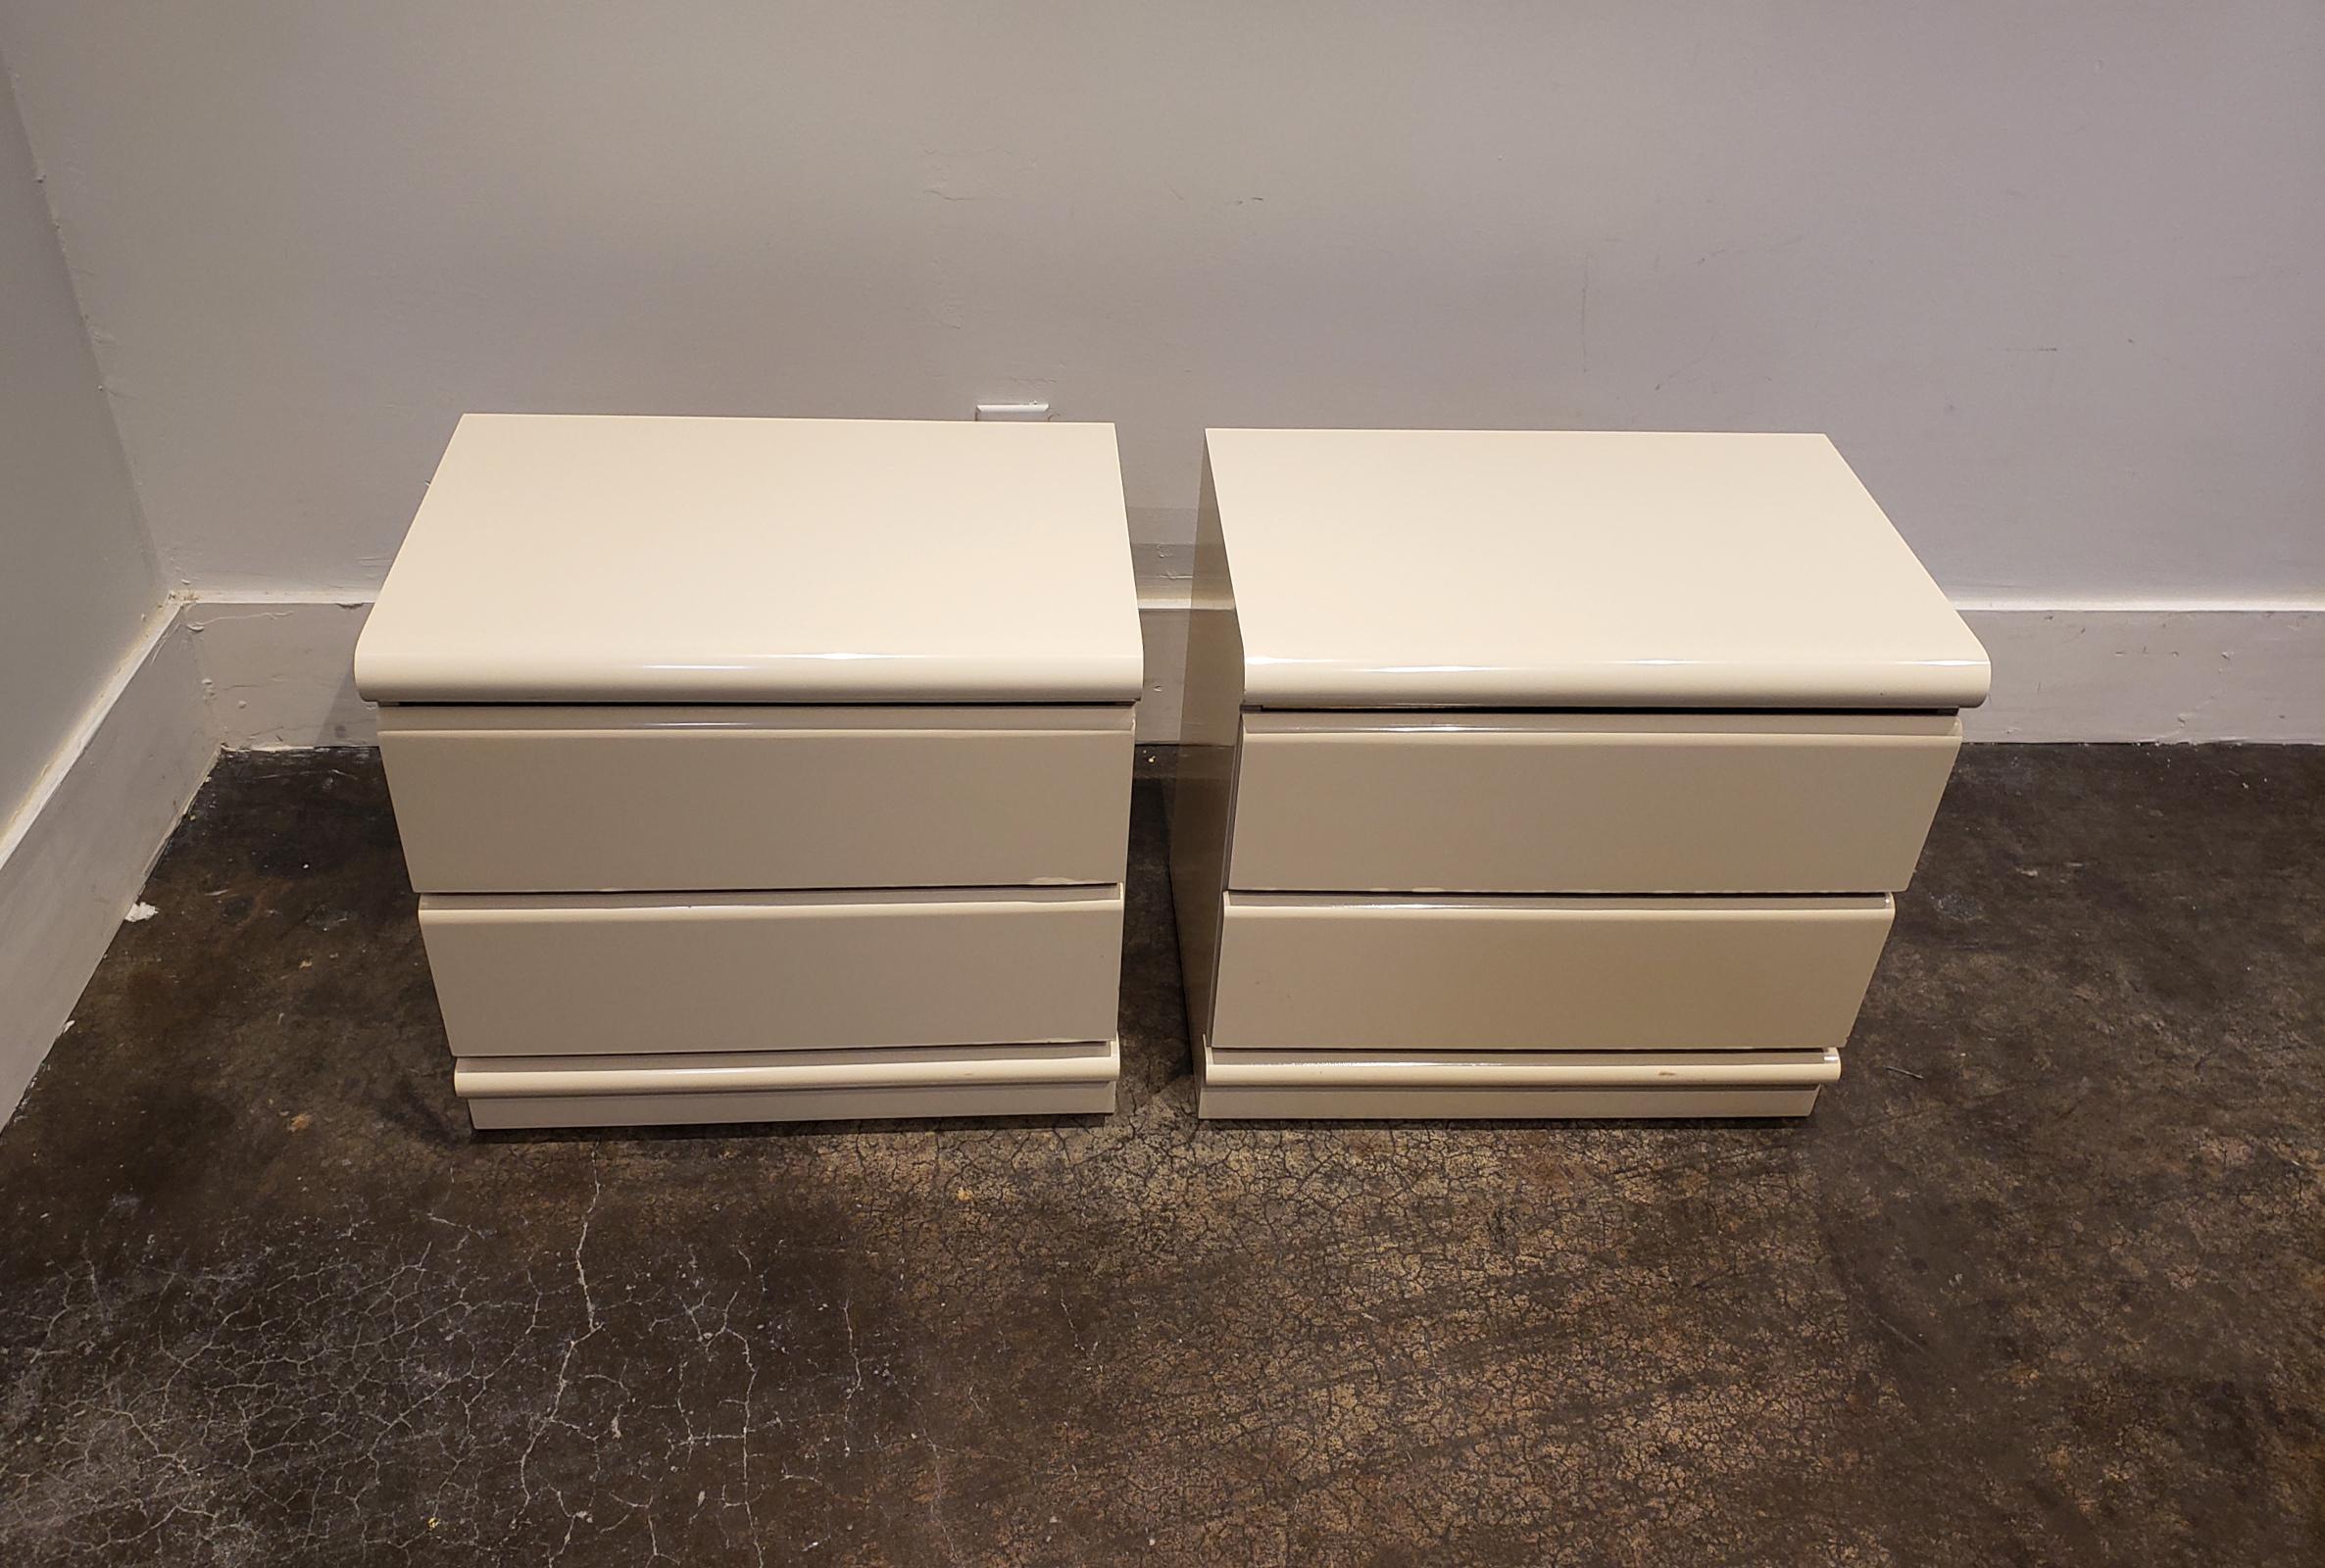 Pair of white lacquered two-drawer nightstands manufactured by Broyhill in the 1970s. Slick minimal design; white rounded fronts with brass/gold veneer accents.